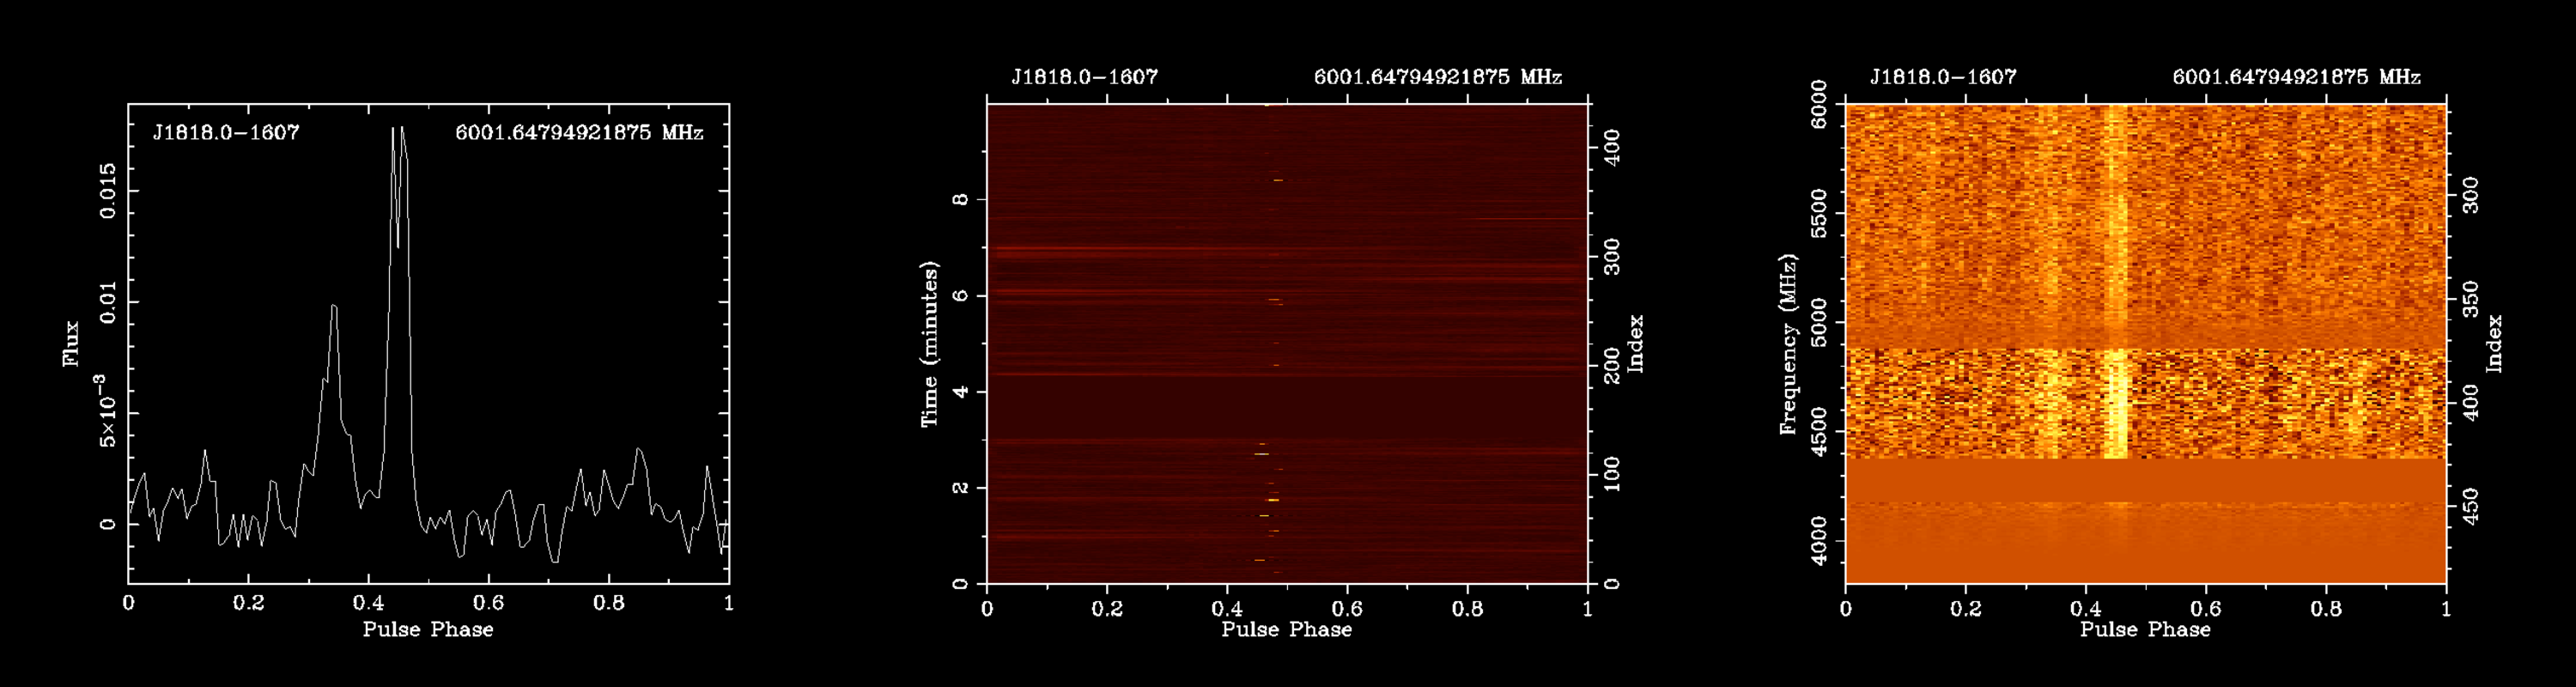 Detection of a new magnetar candidate across 4 - 11 GHz with Breakthrough Listen at GBT